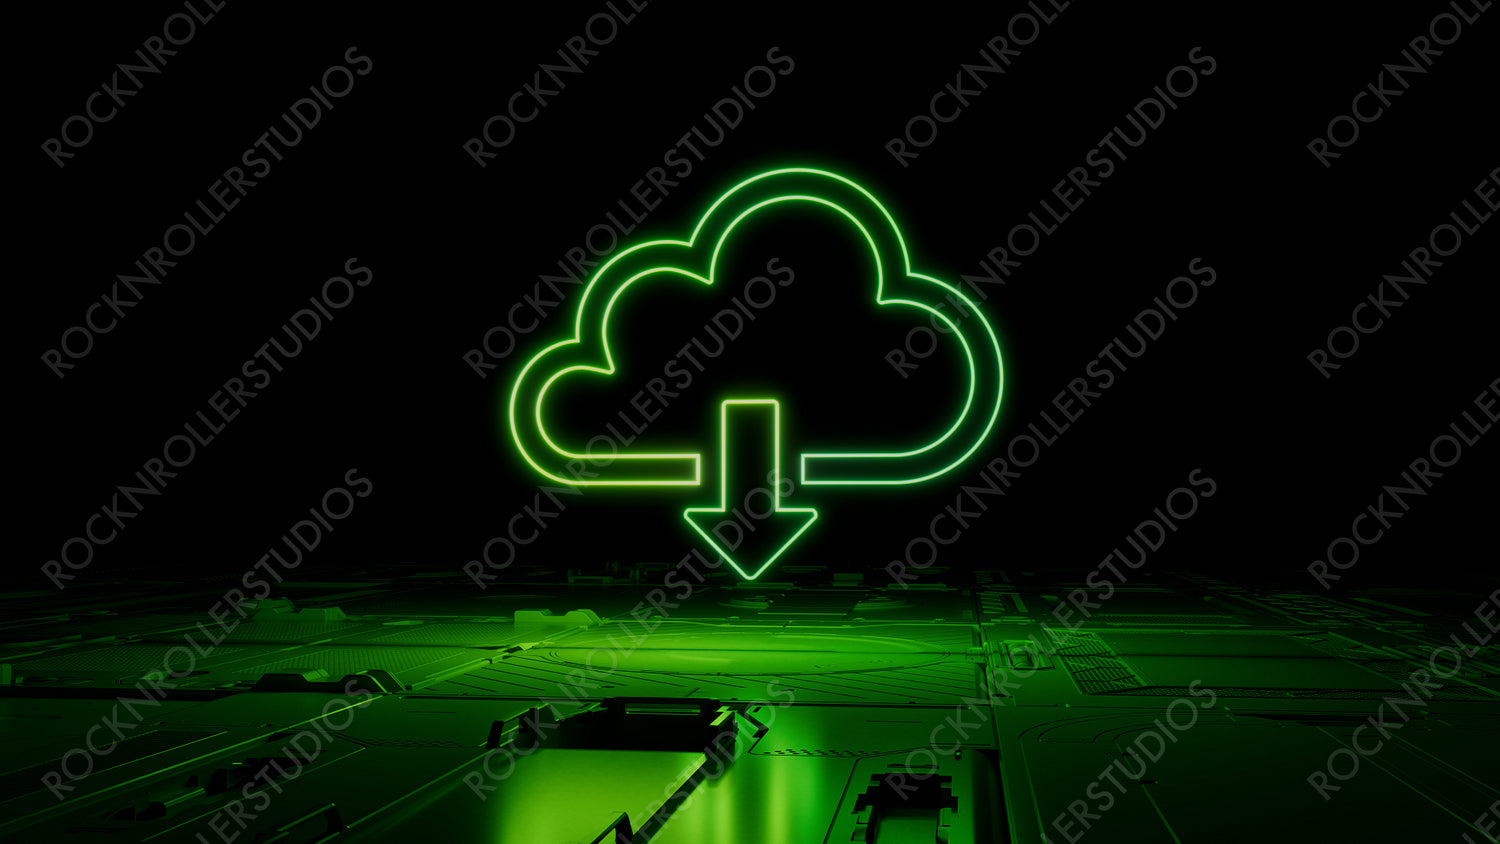 Green Data storage Technology Concept with cloud download symbol as a neon light. Vibrant colored icon, on a black background with high tech floor. 3D Render